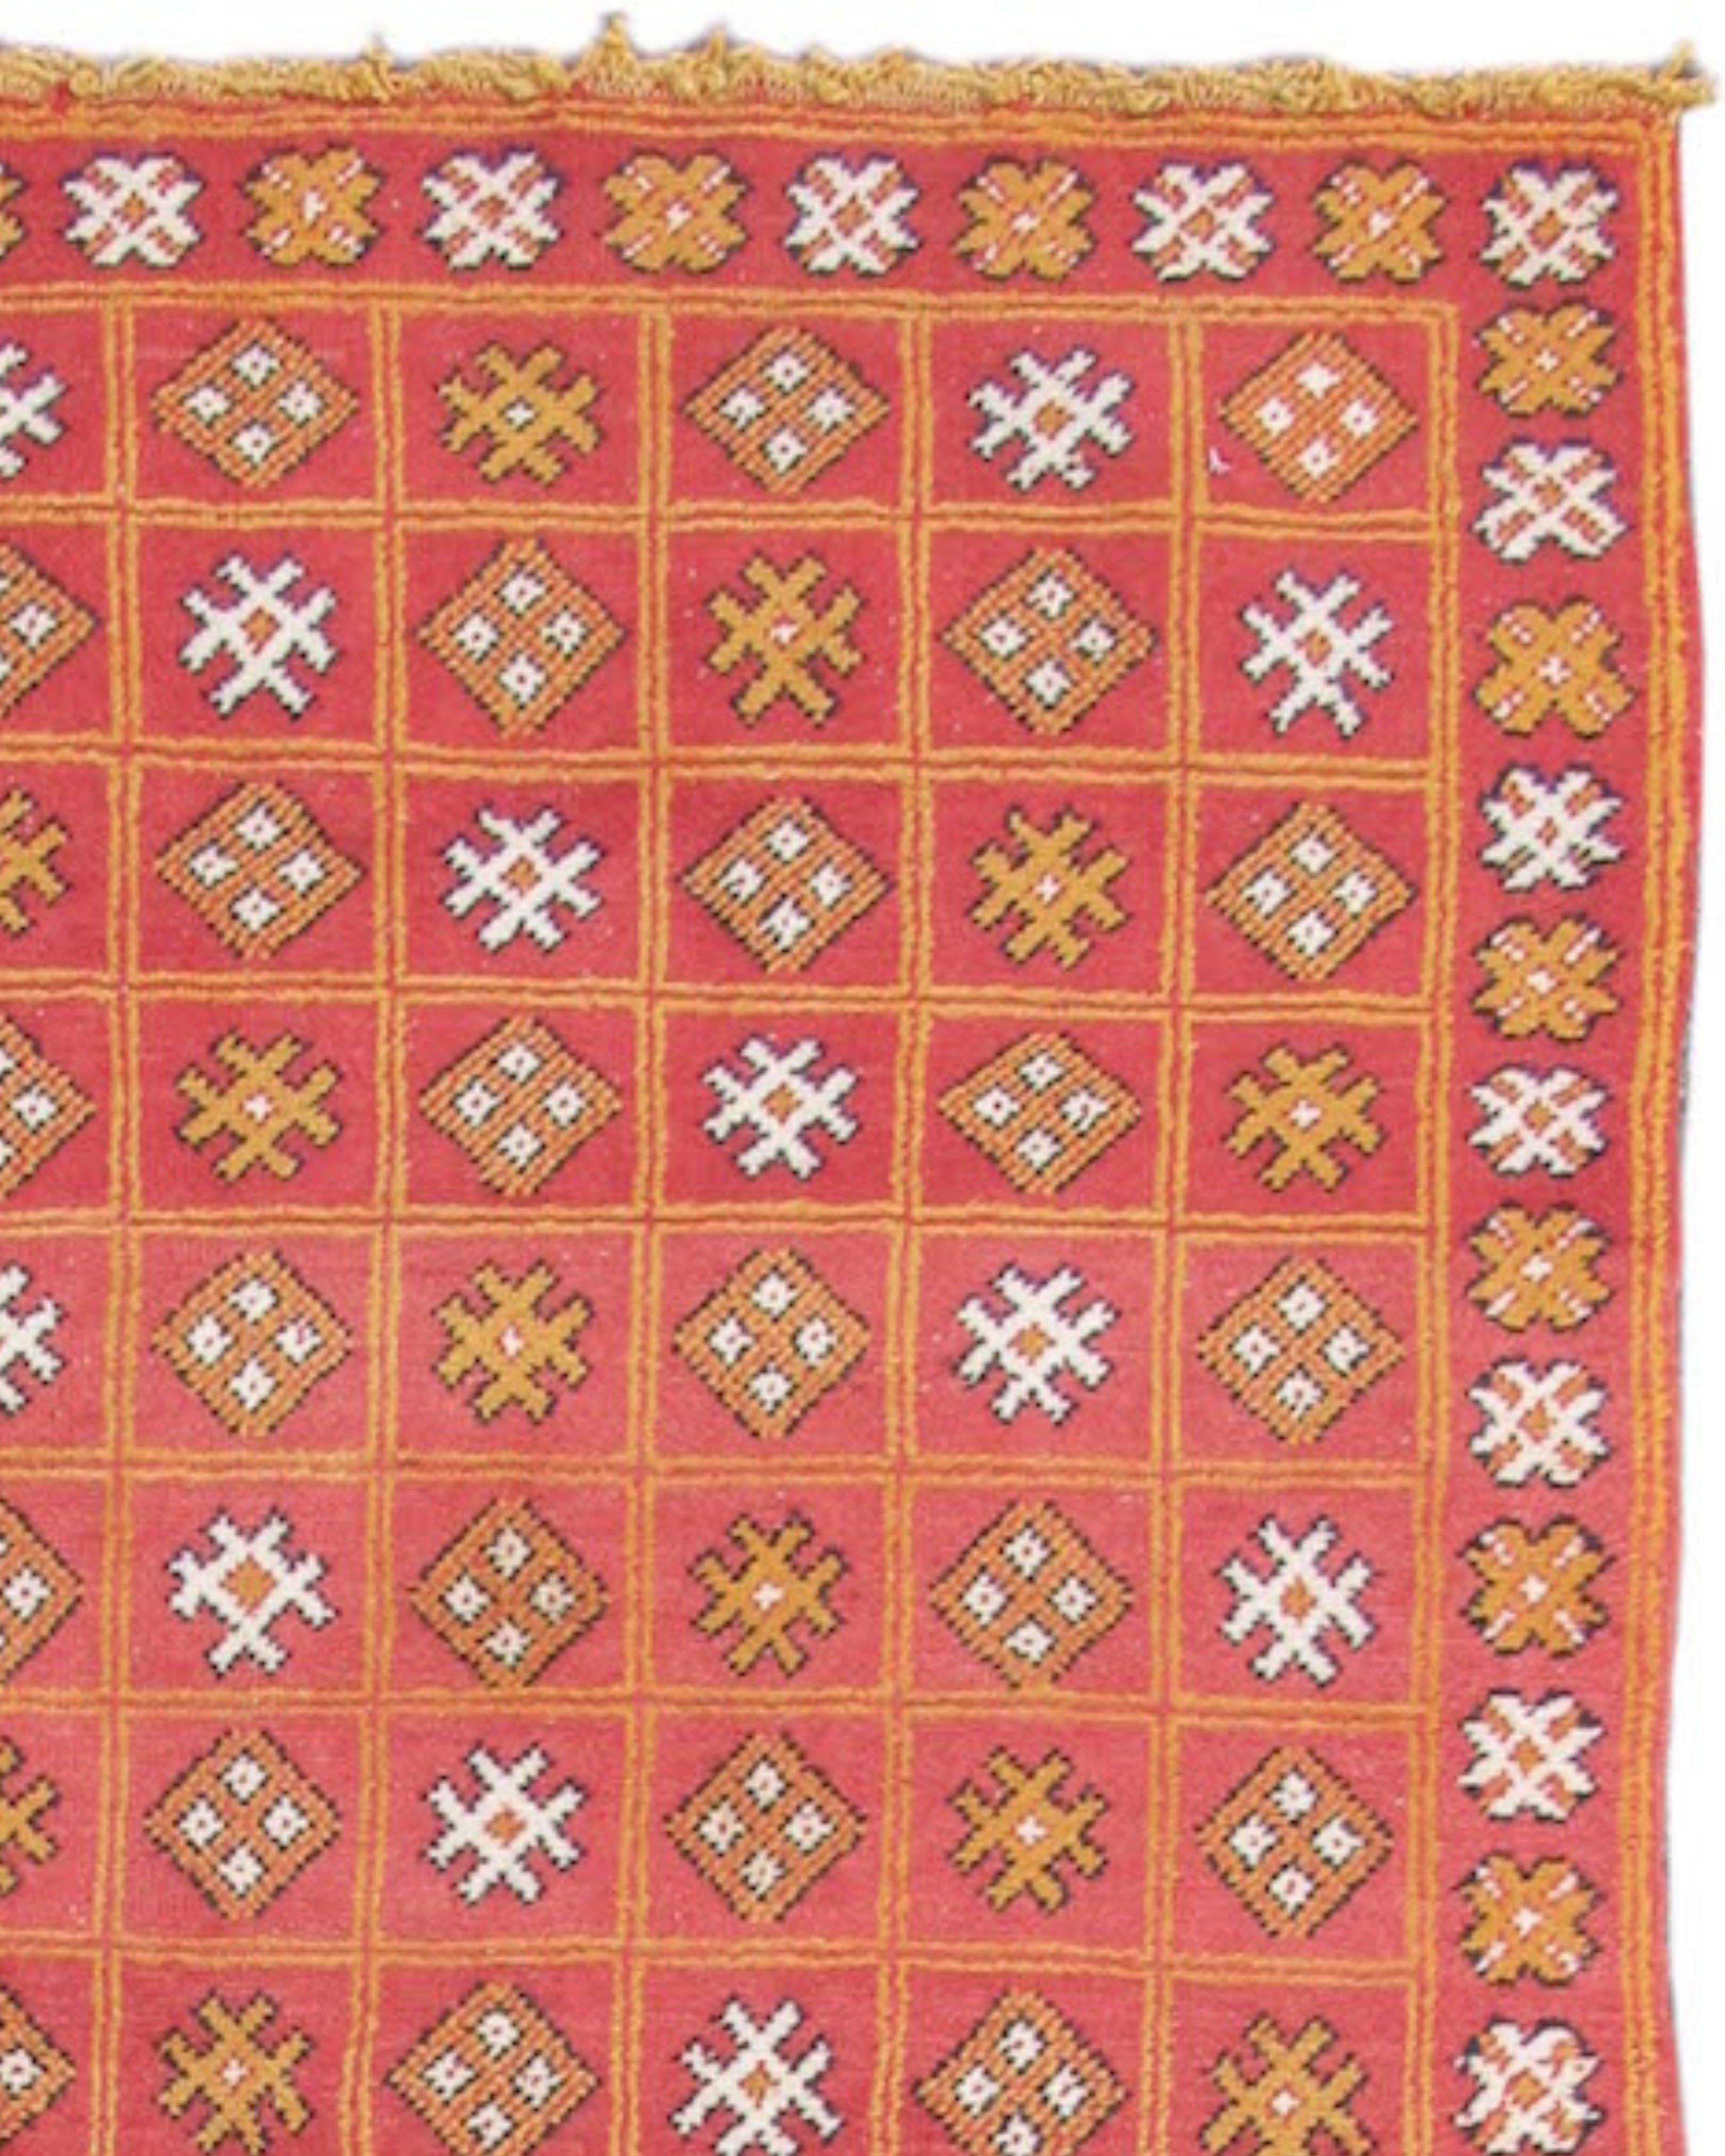 Moroccan Rug, Mid-20th Century

Additional Information:
Dimensions: 3'5